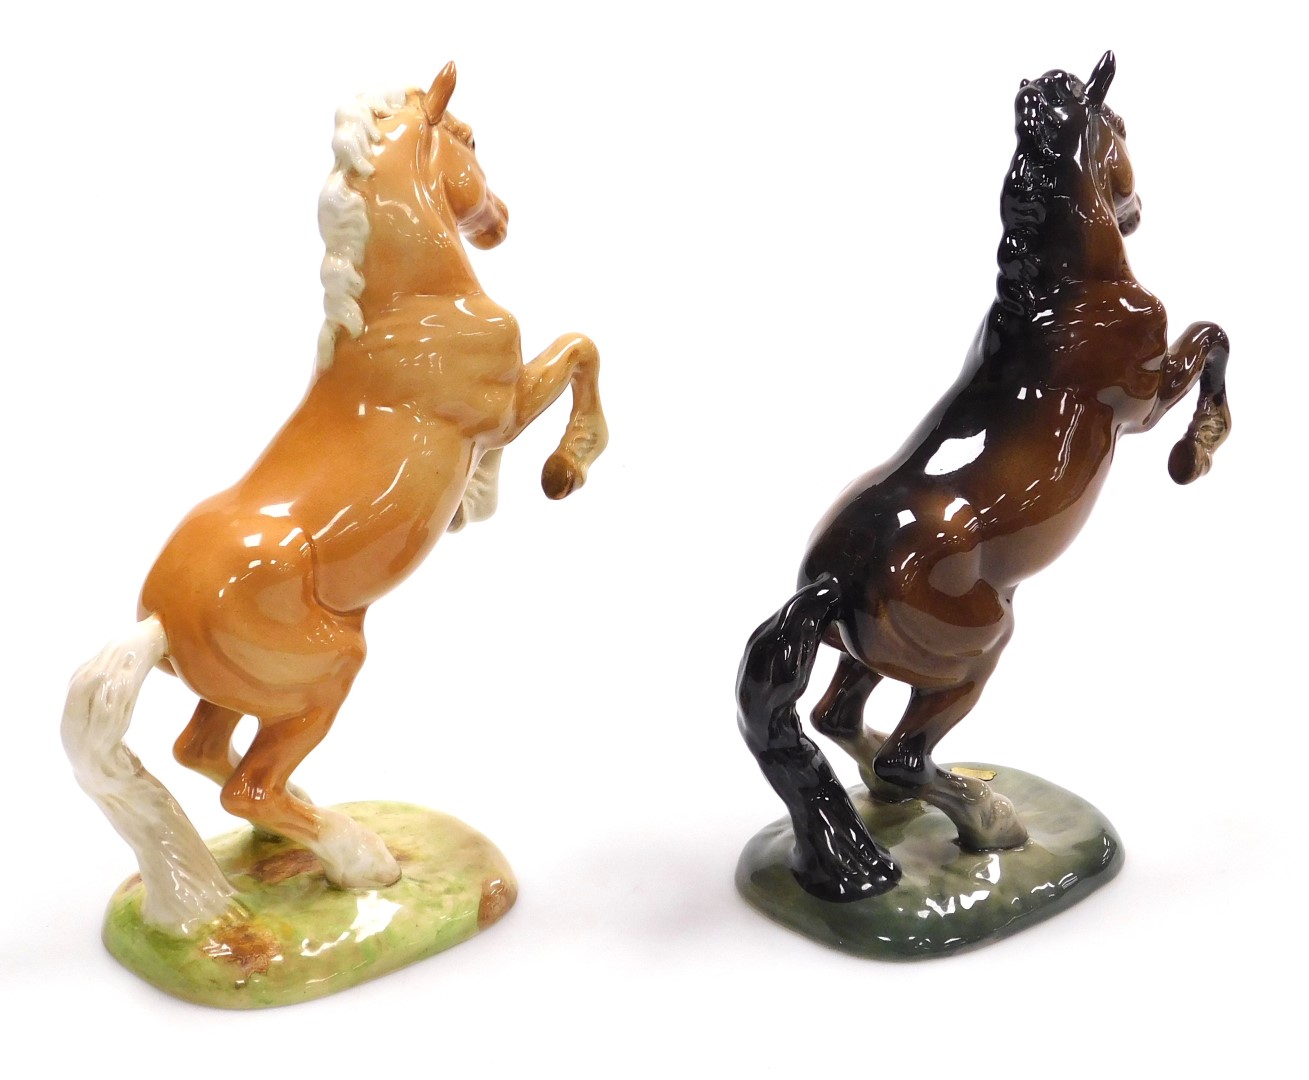 Two Beswick pottery figures of rearing horses, model number 1015, one Palomino, the other brown glos - Image 2 of 3